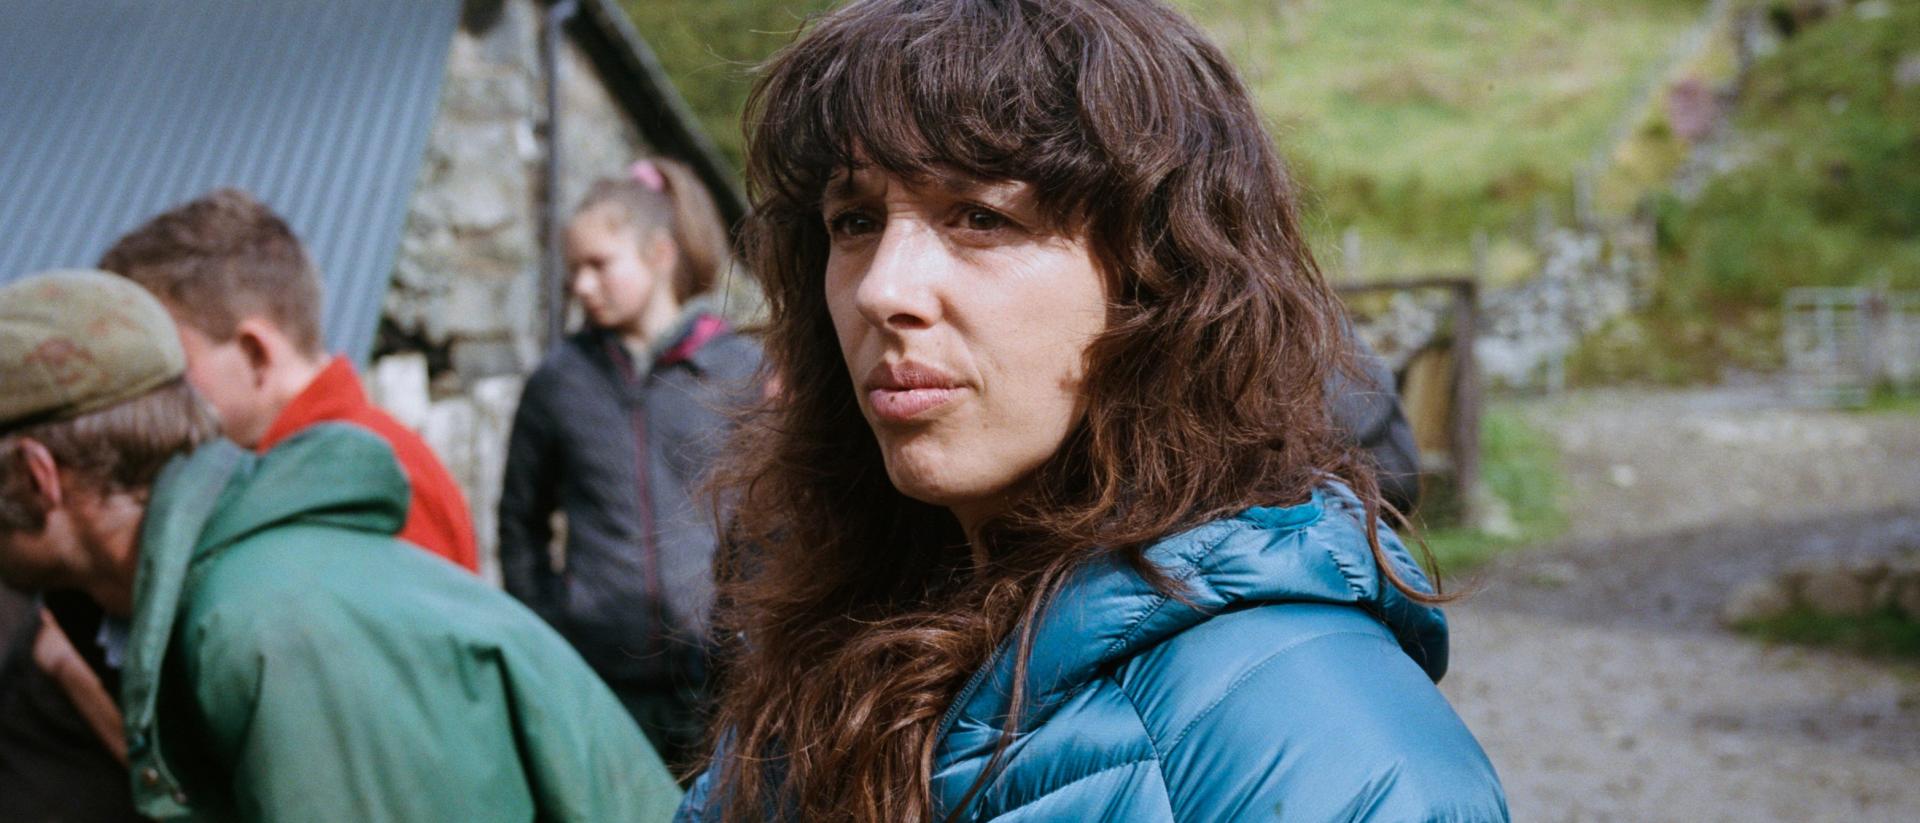 a person wearing a thick blue coat standing in a farmyard with three people behind her